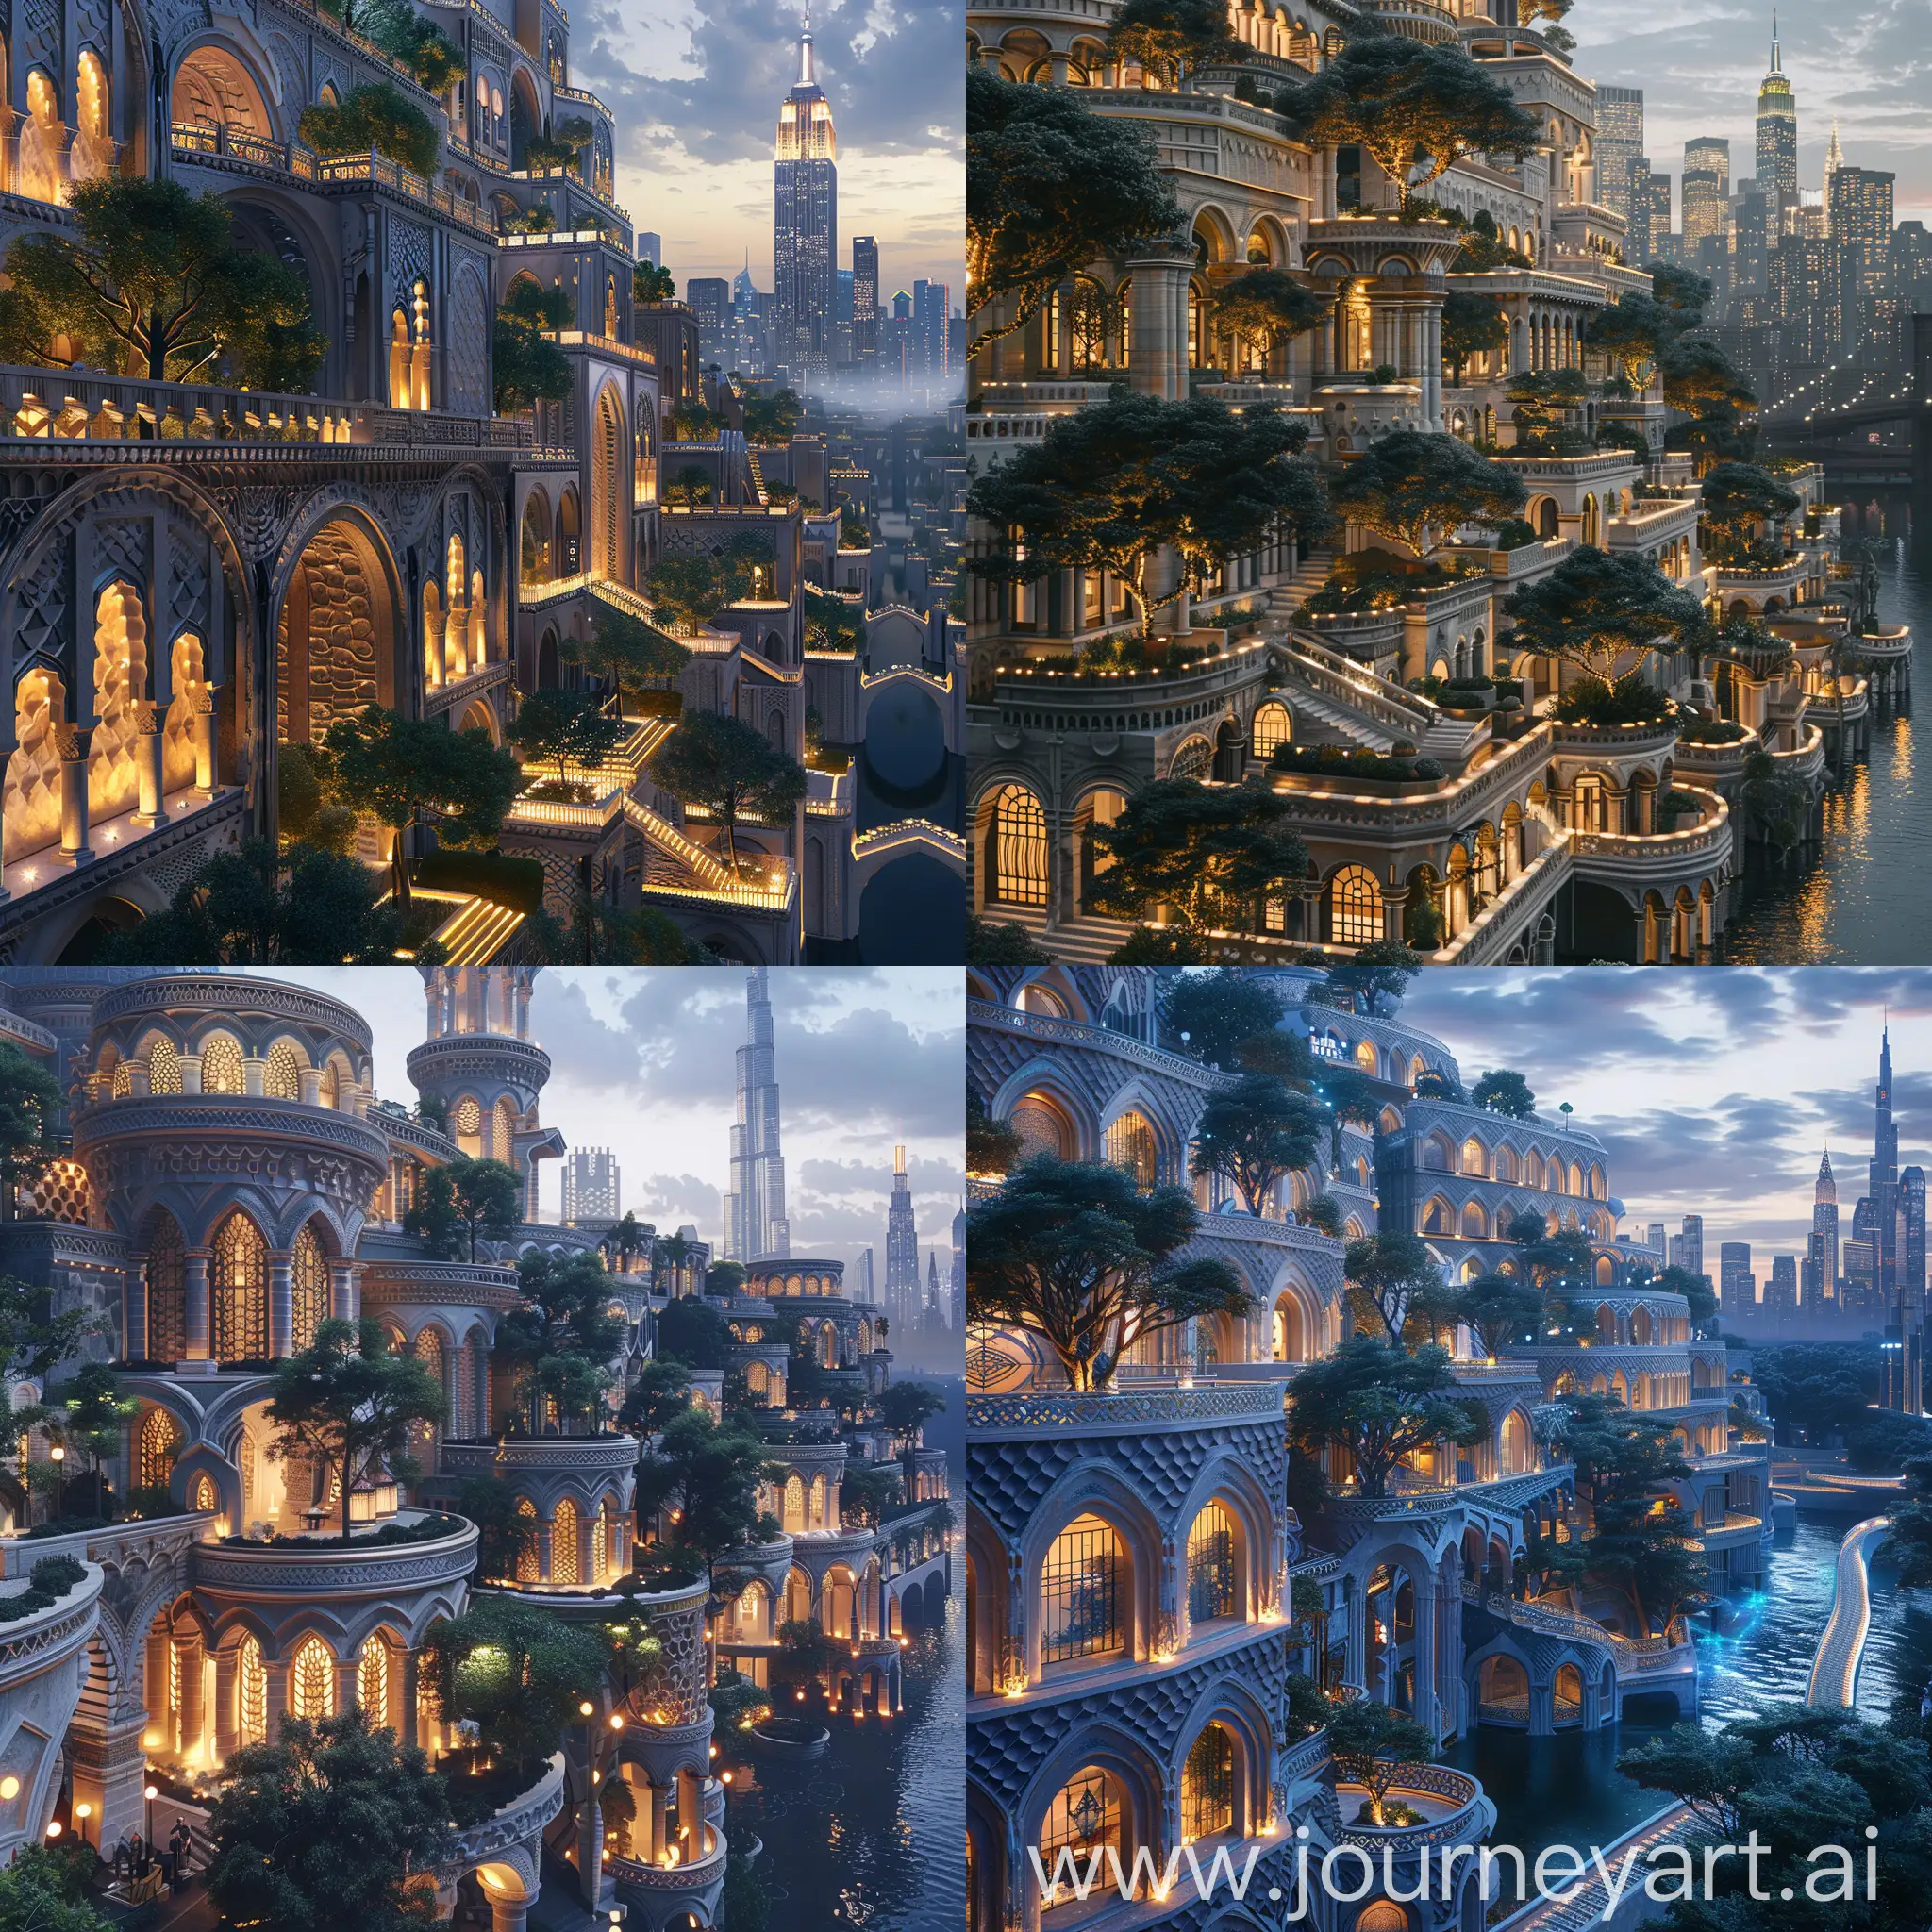 Beautiful futuristic metropolis in an alternate timeline where all buildings retain traditional elements, ornate travertine architecture with scale-like patterns on facades and illuminated trees, monumental terraced buildings, canals, New York City vibe, beautiful fictional skyscrapers in distance, photograph